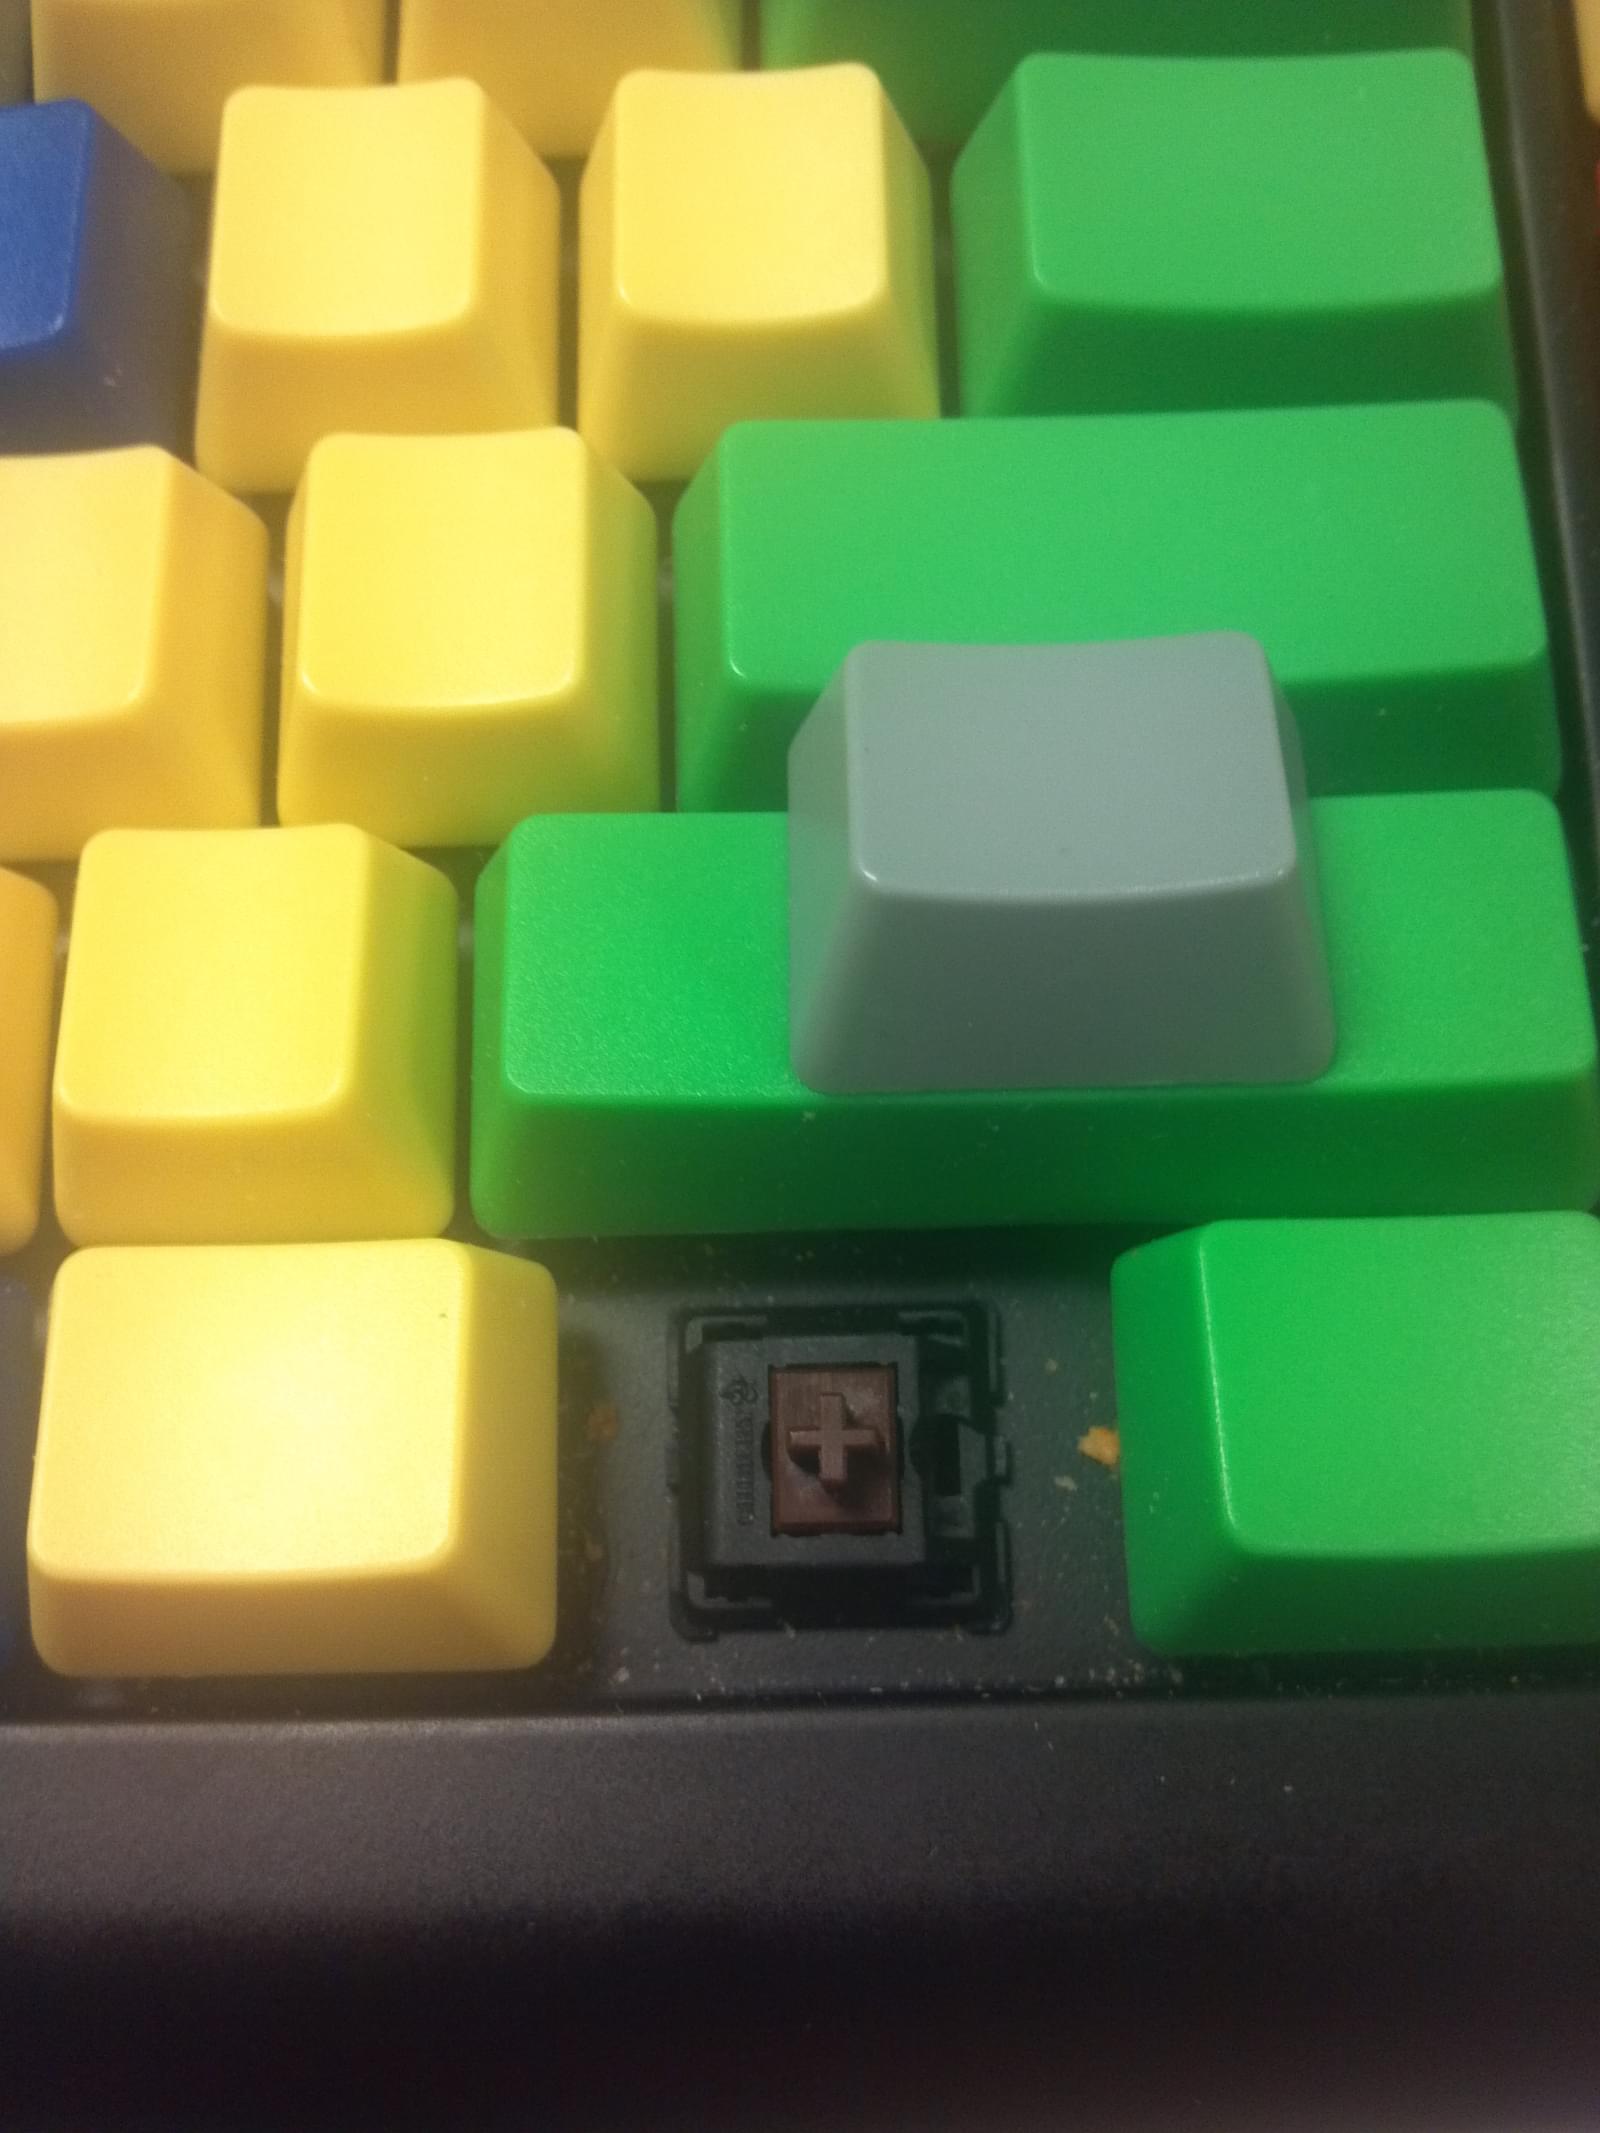 WASD Keyboard with Keycap Removed